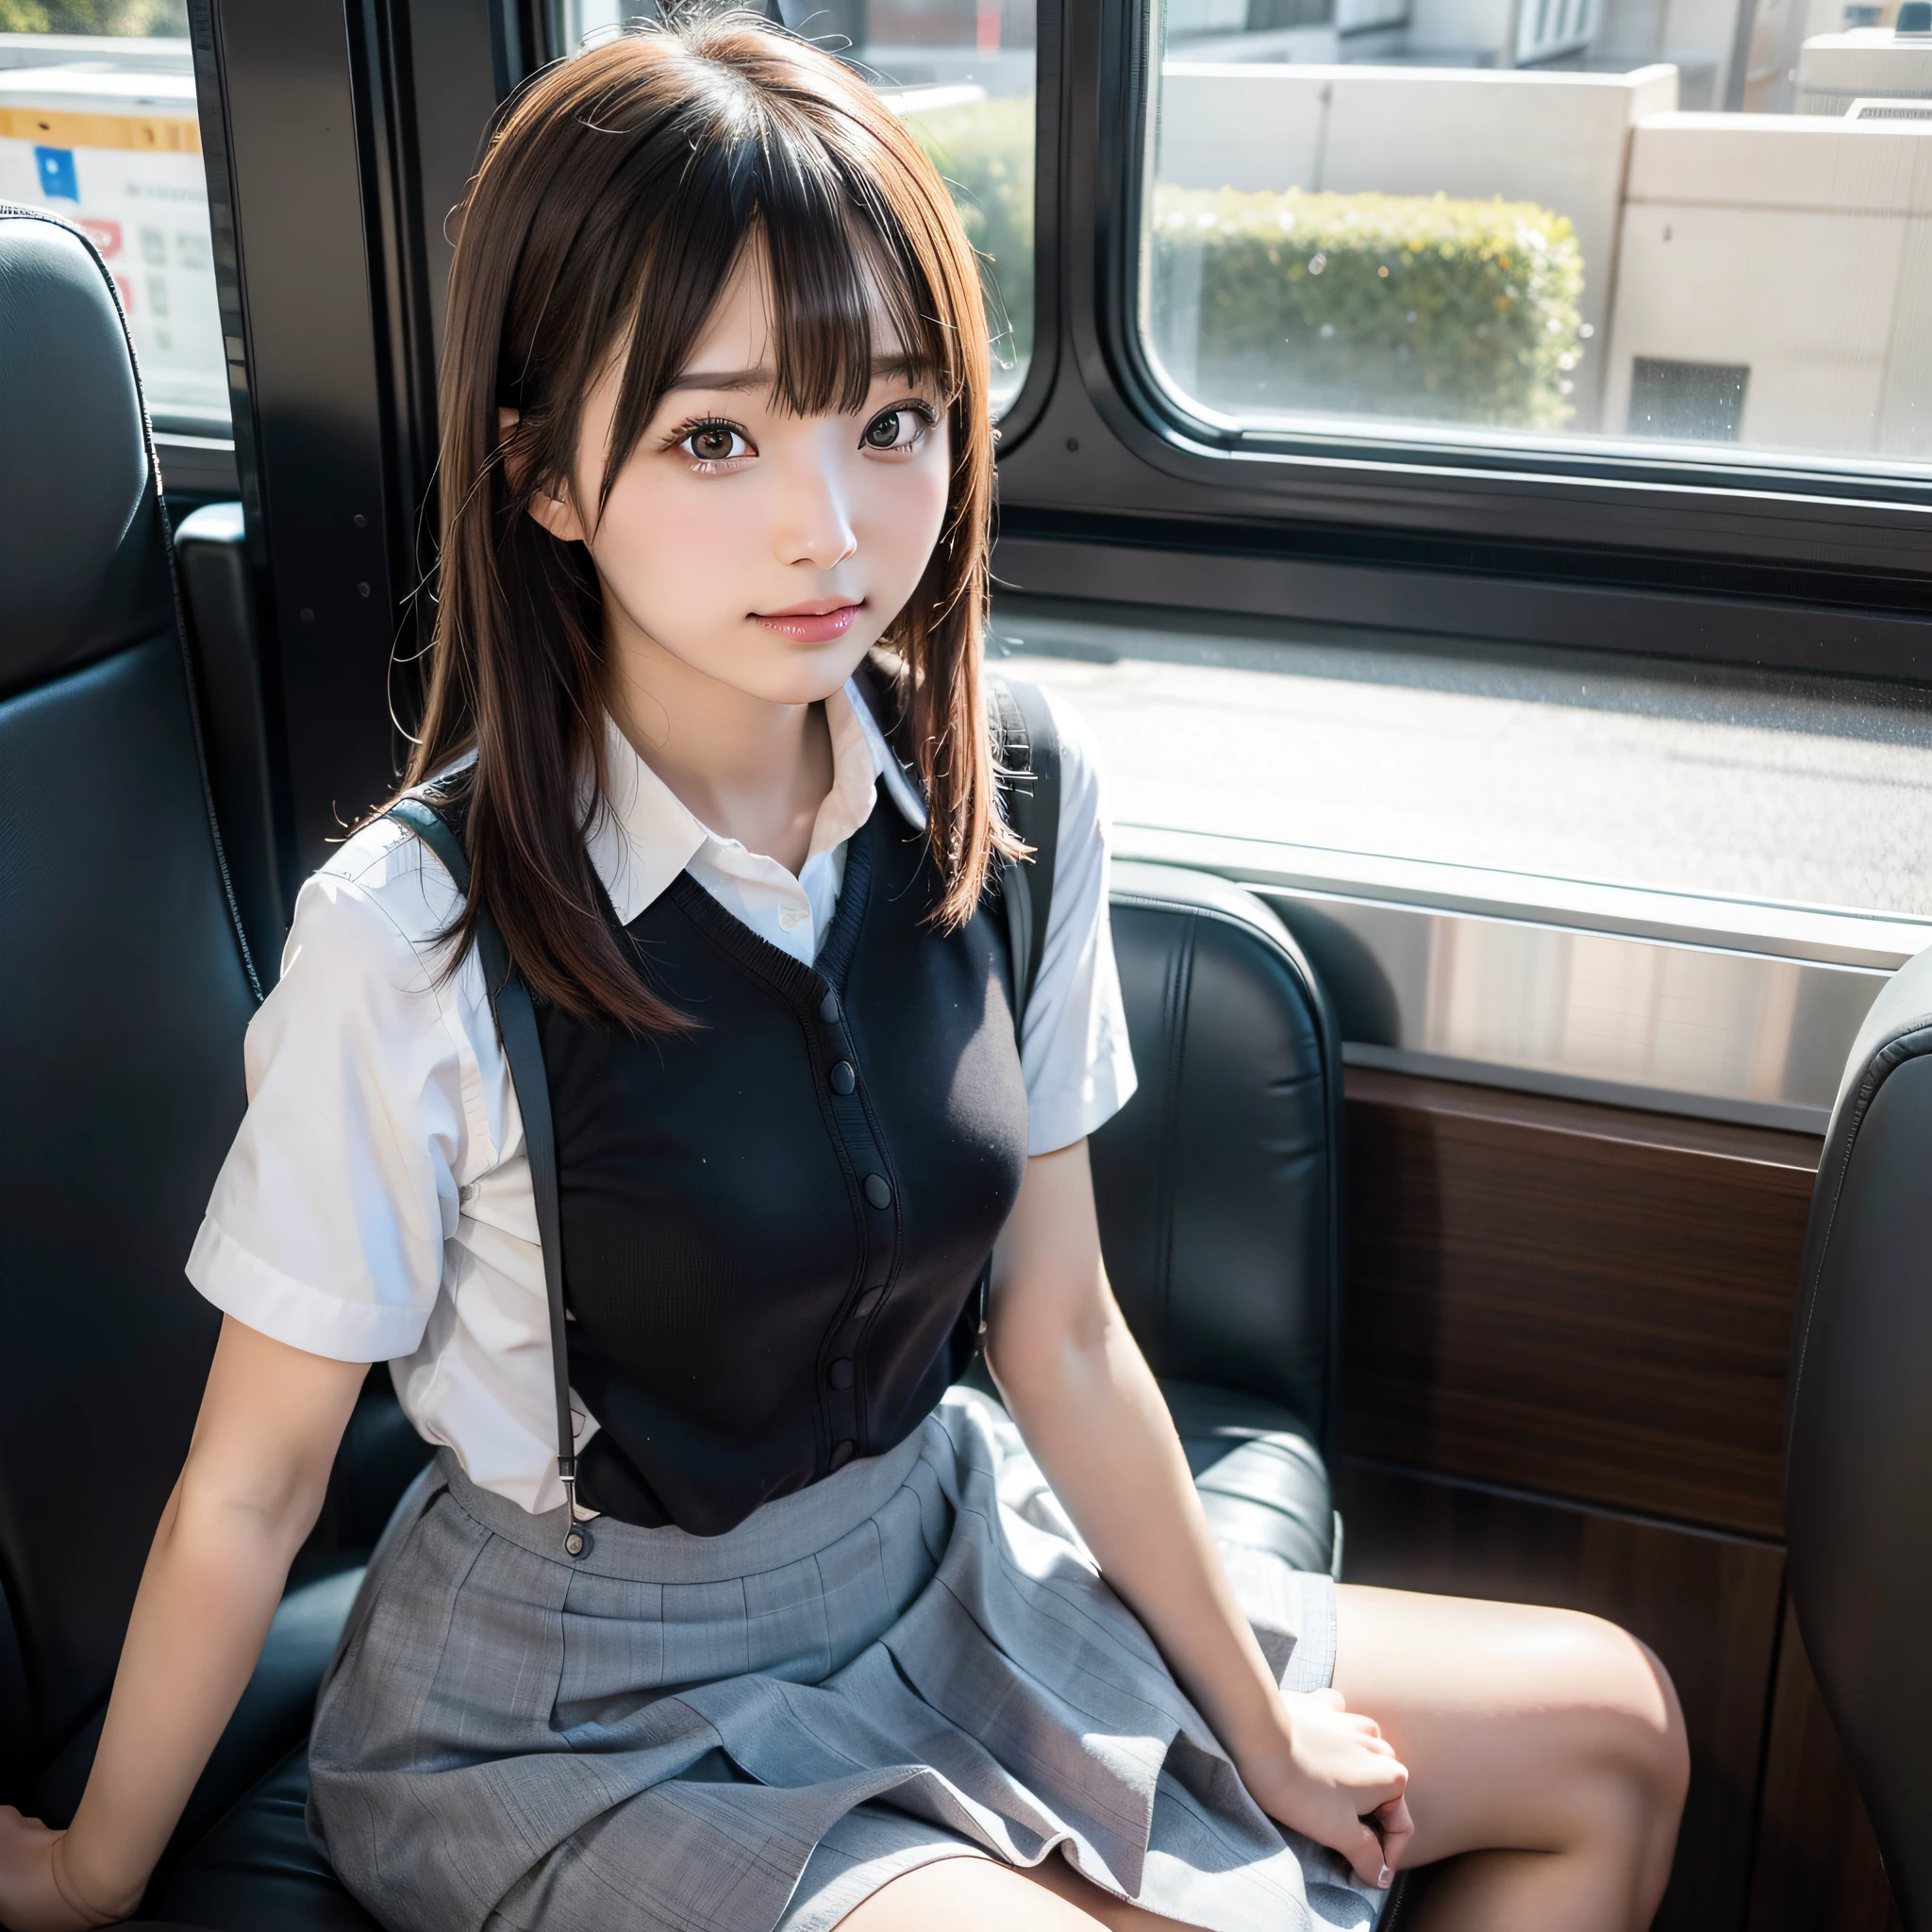 araffe sitting on a seat in a bus with a skirt, taken with canon eos 5 d mark iv, taken with canon 5d mk4, taken with sony a7r camera, photo taken with sony a7r, sat down in train aile, japanese model, cute schoolgirl, pretty face with arms and legs, hyperrealistic 